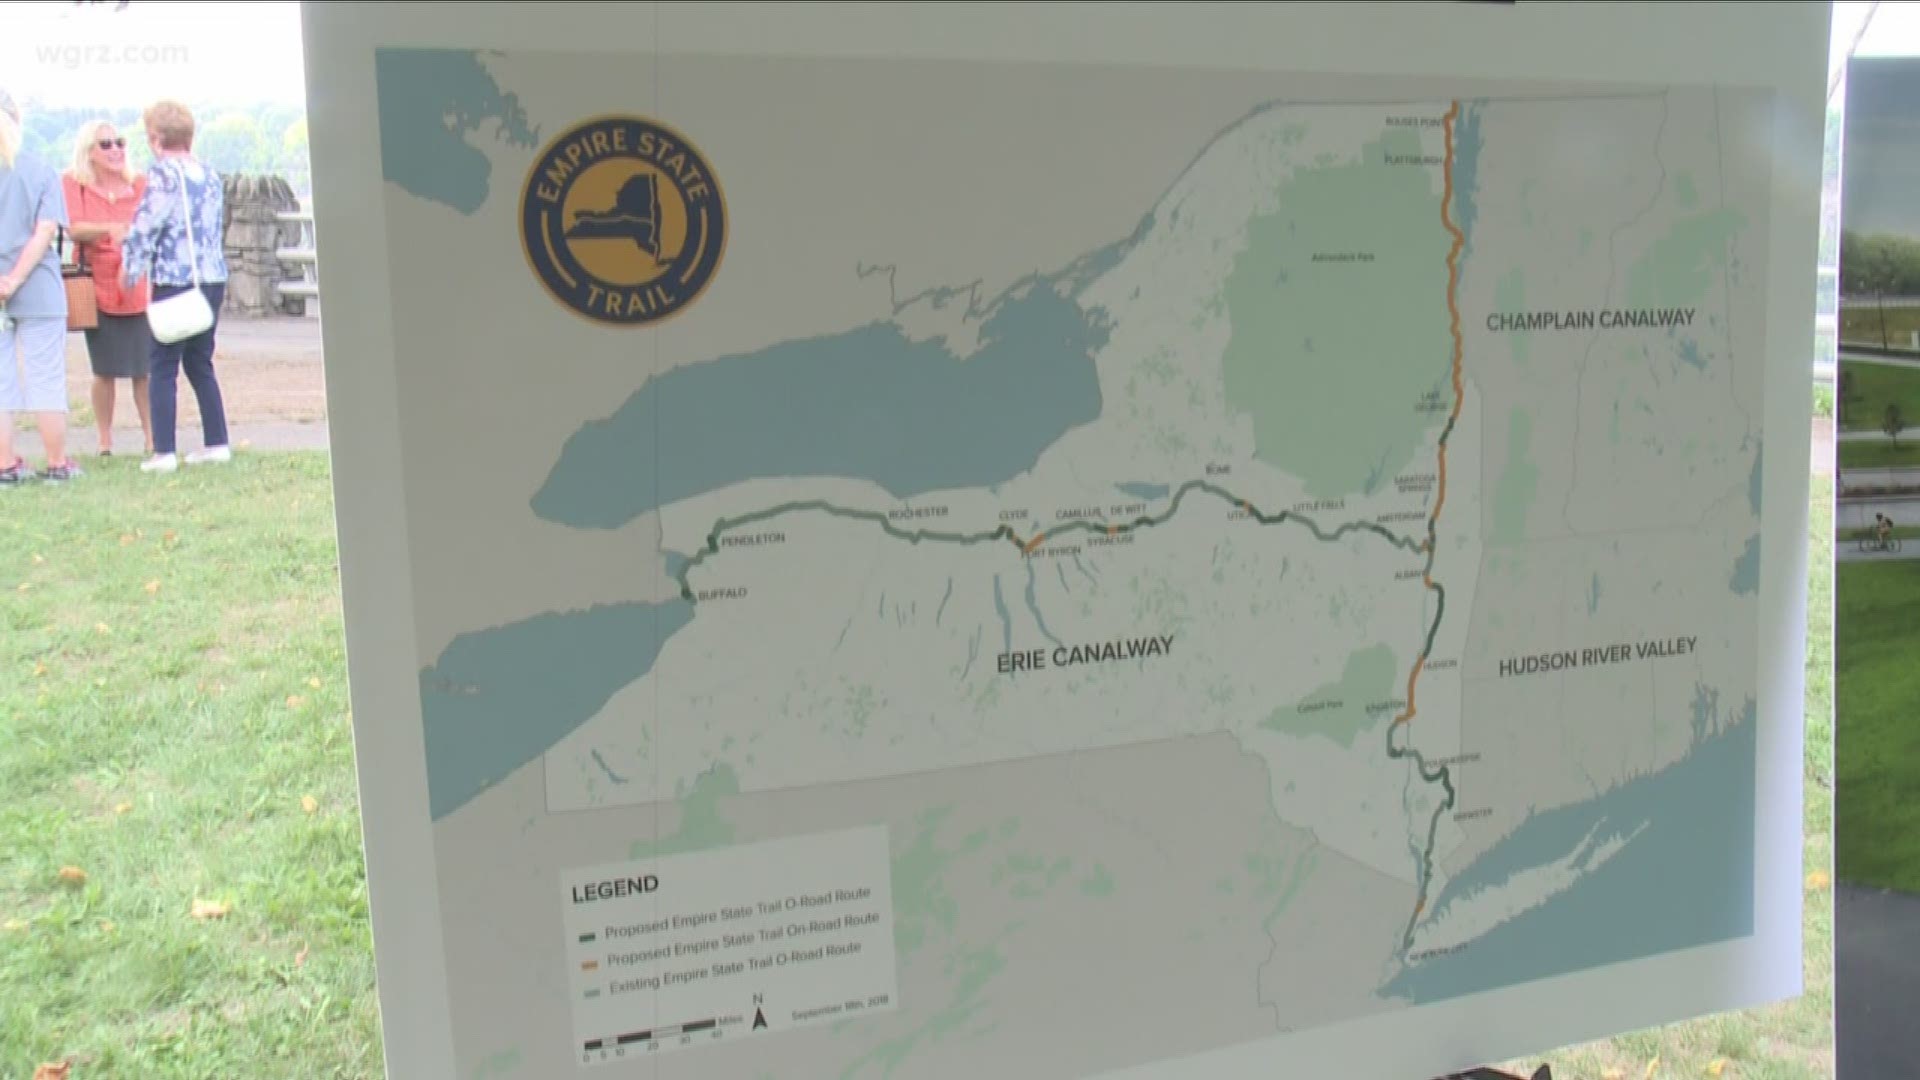 State Trails To Extend From NYC To The Falls